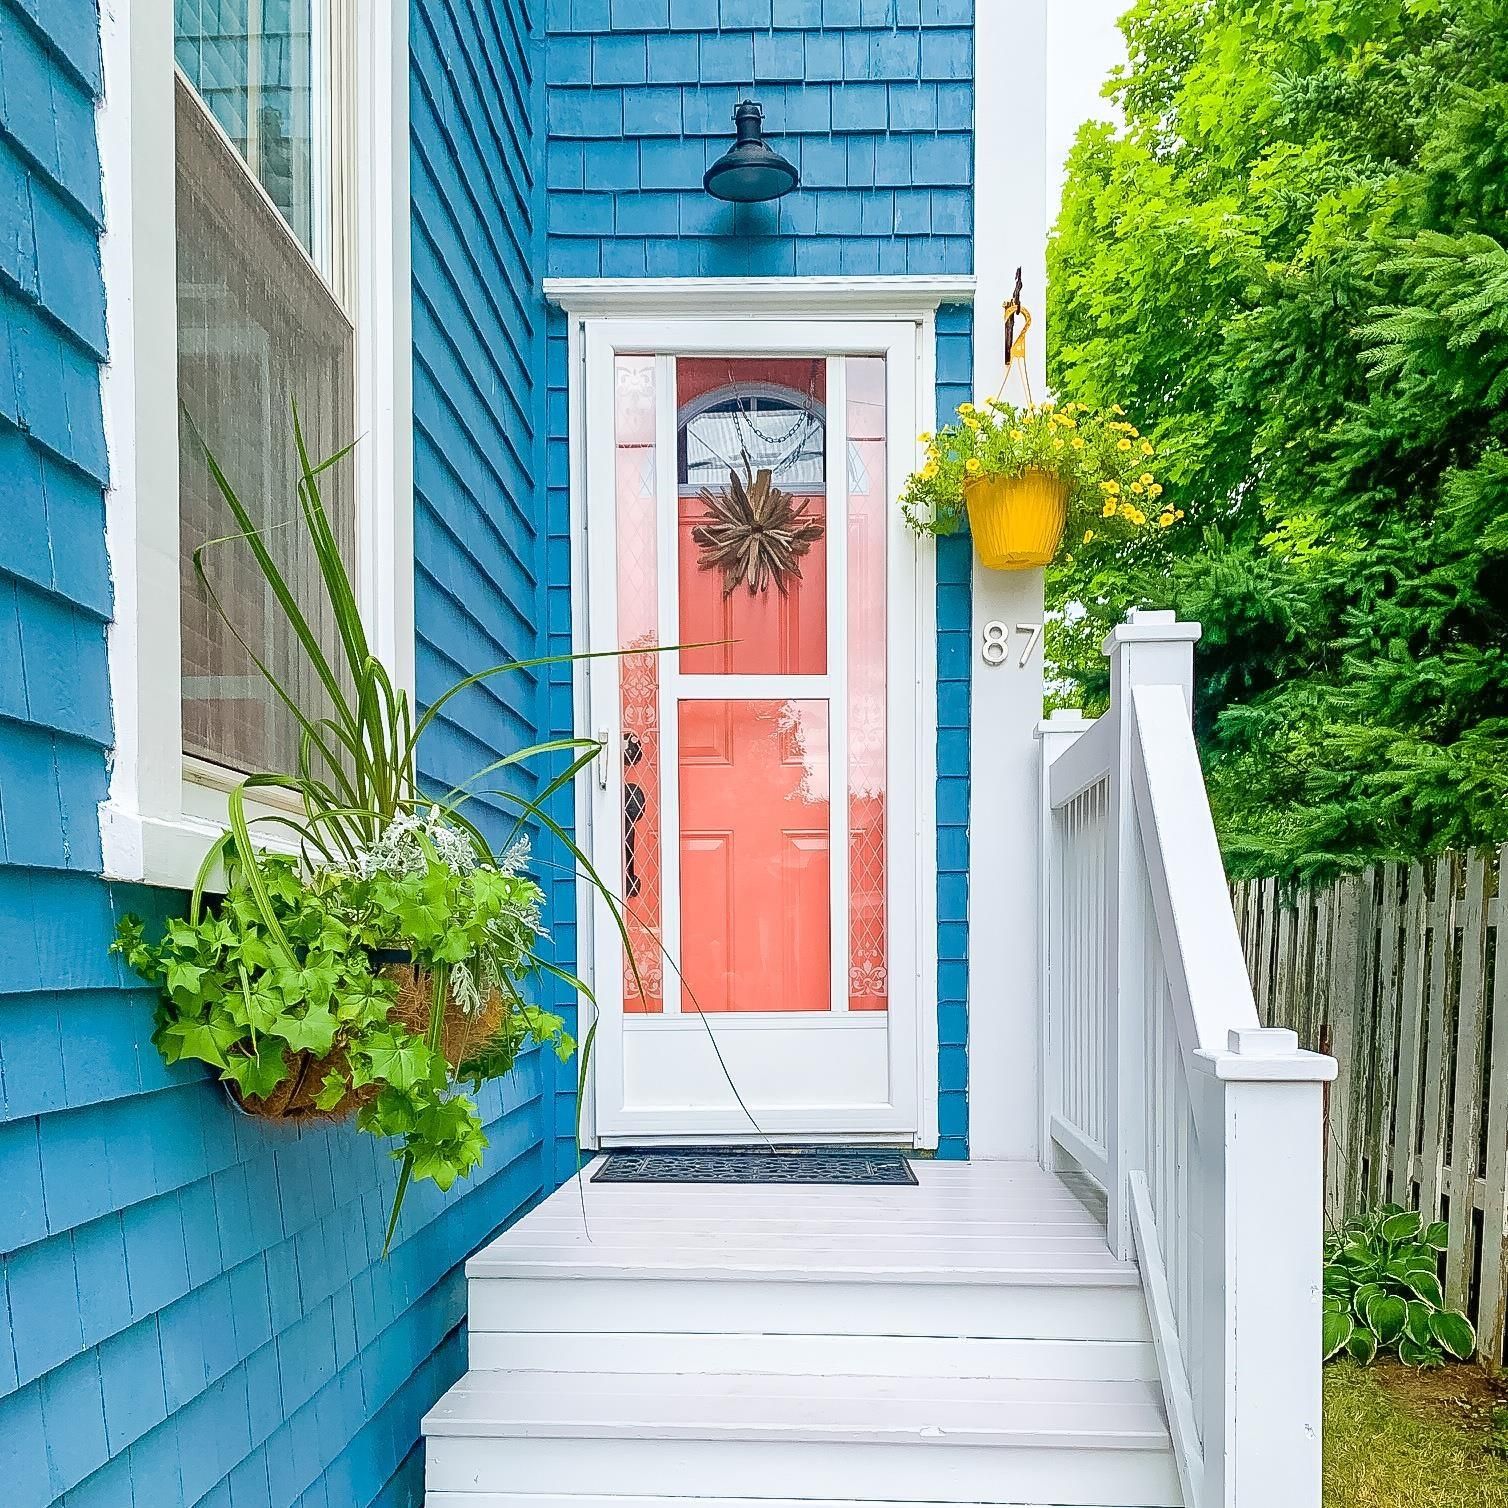 Main Photo: 87 Lawrence Street in Lunenburg: 405-Lunenburg County Residential for sale (South Shore)  : MLS®# 202219937